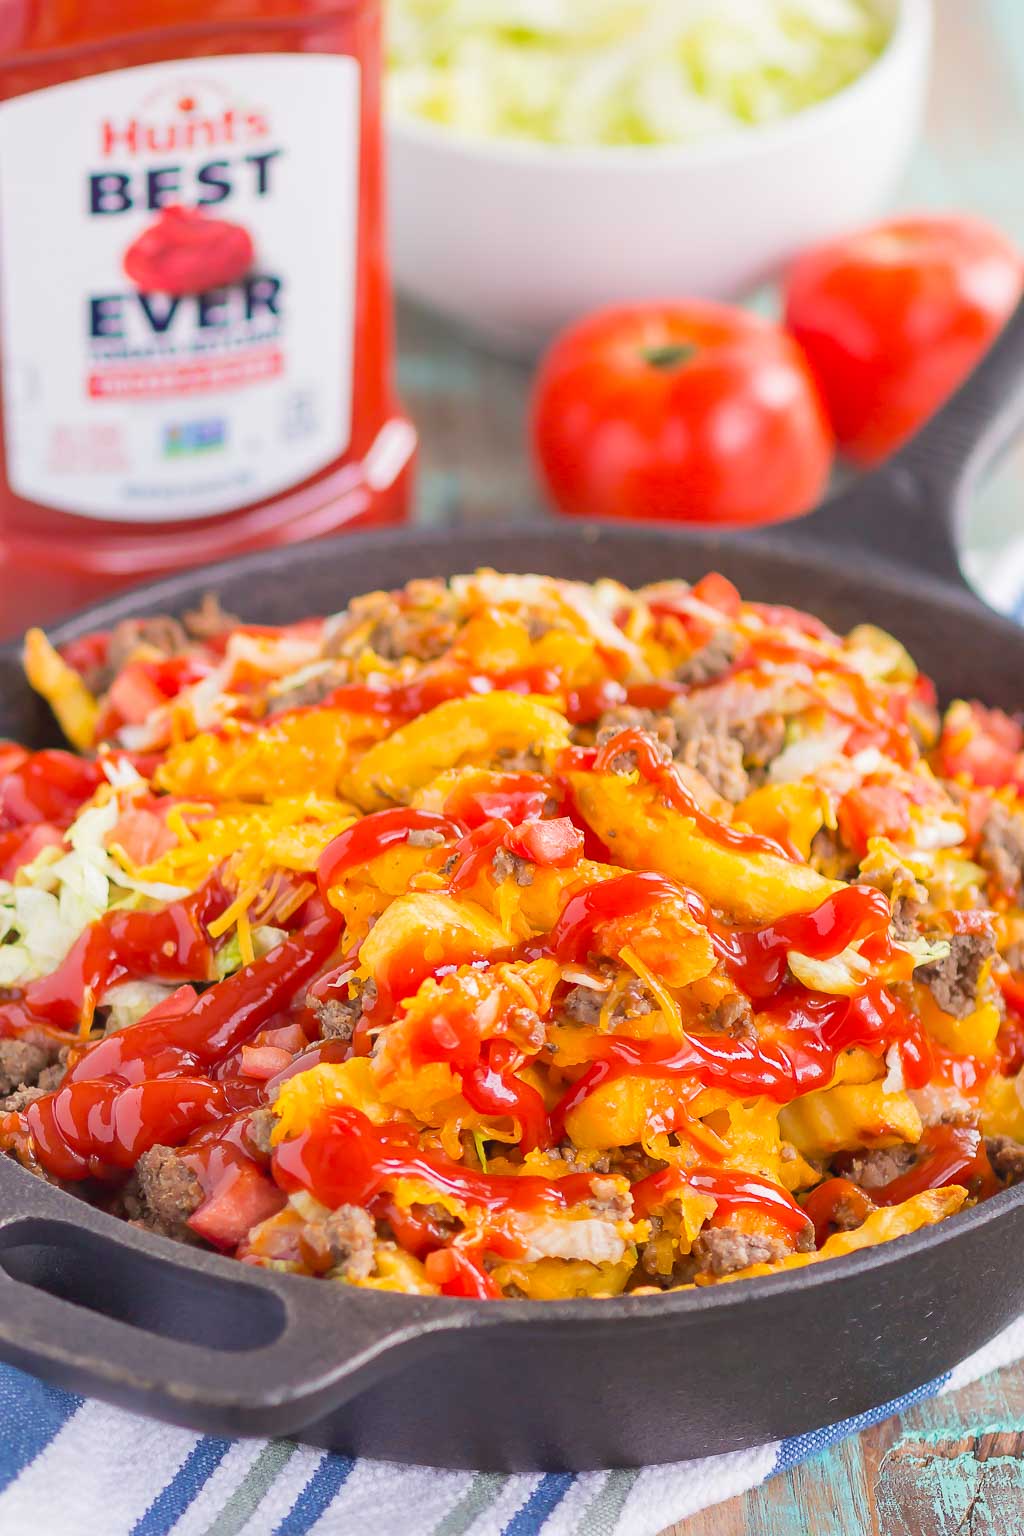 Loaded Cheeseburger Fries taste just like your favorite burger, but in appetizer form. These fries are topped with the classic ingredients of a cheeseburger and are baked to perfection. Easy to make and even better to eat, you'll love the crispy, crunchy, cheesy taste of this fun snack! #fries #cheeseburgerfries #loadedfries